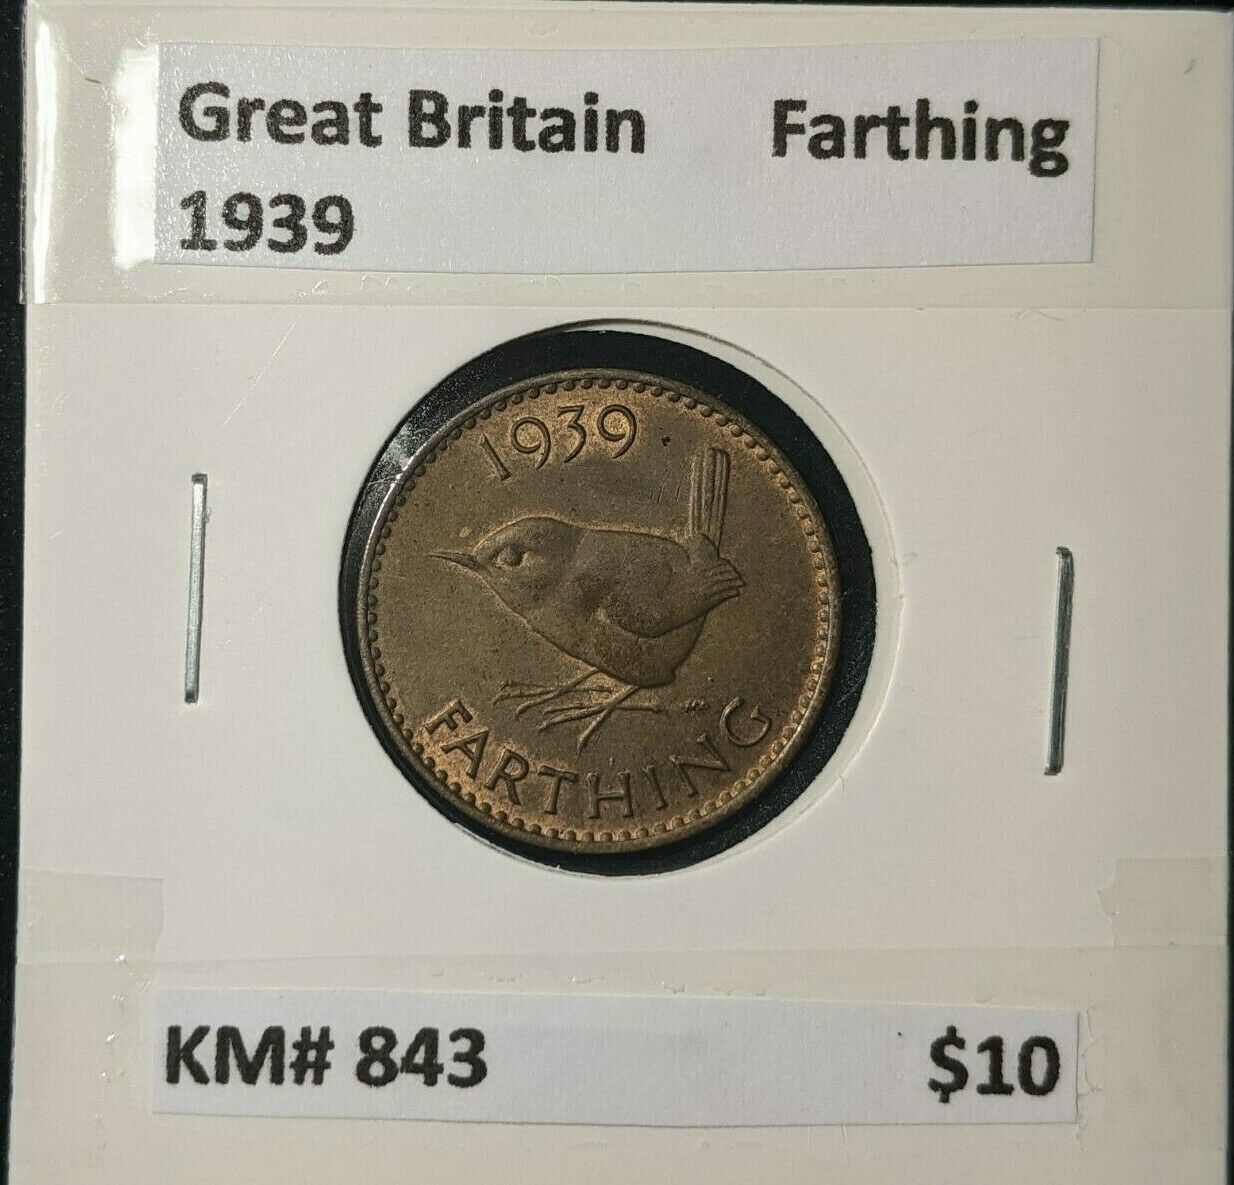 Great Britain 1939 1/4d Farthing KM# 843 #228